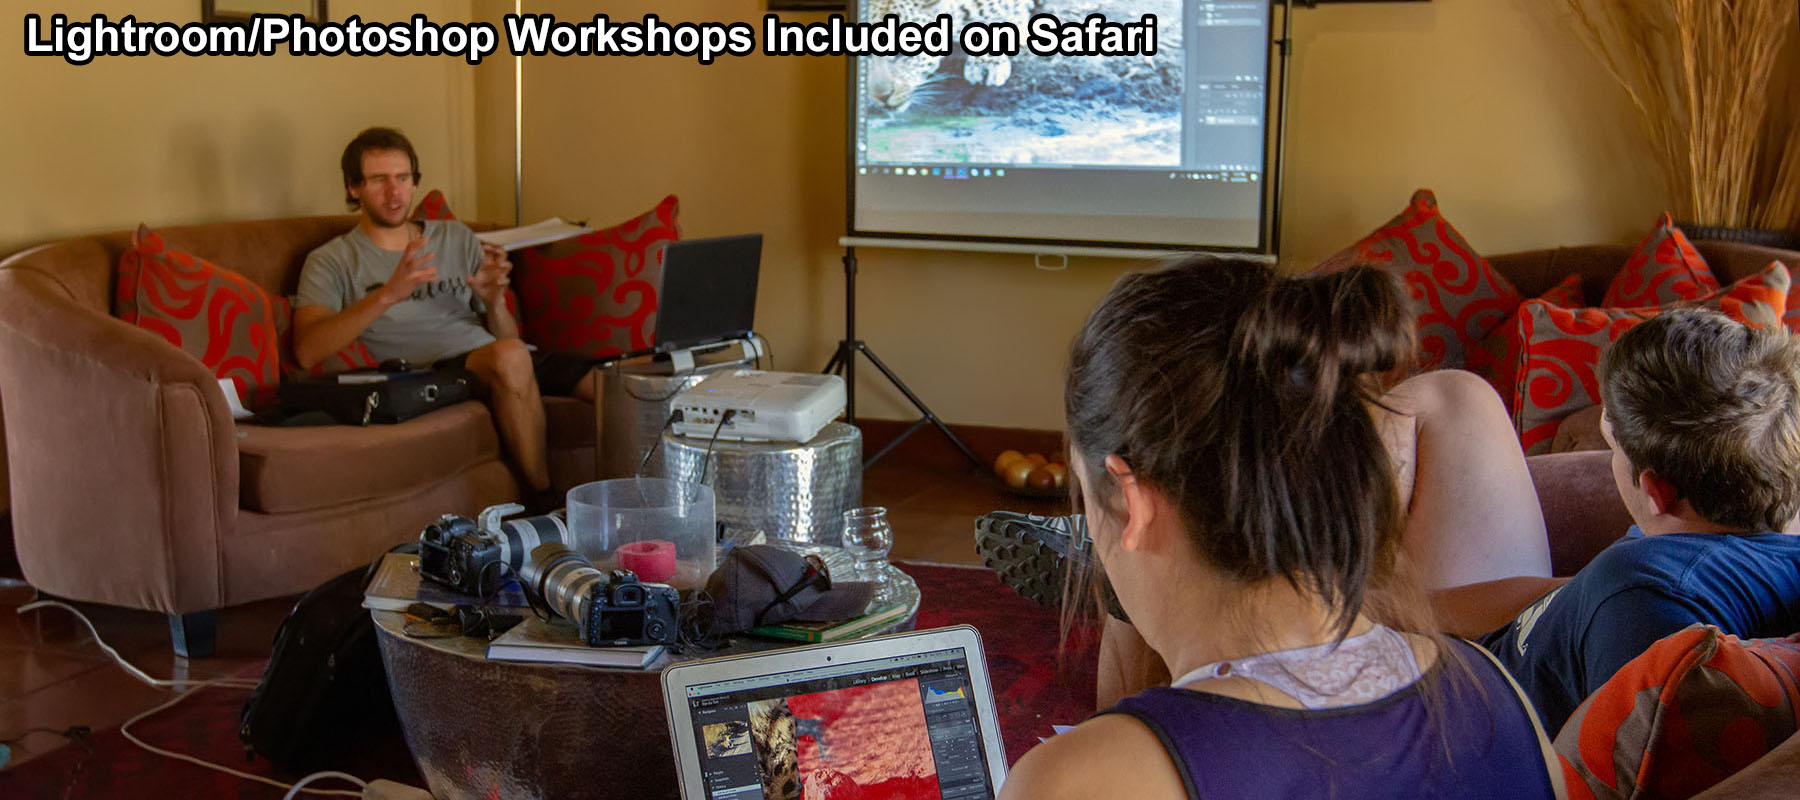 Wildlife Workflow Lightroom and Photoshop editing class for Wildlife Photo Safari clients in Greater Kruger, South Africa and Antarctica